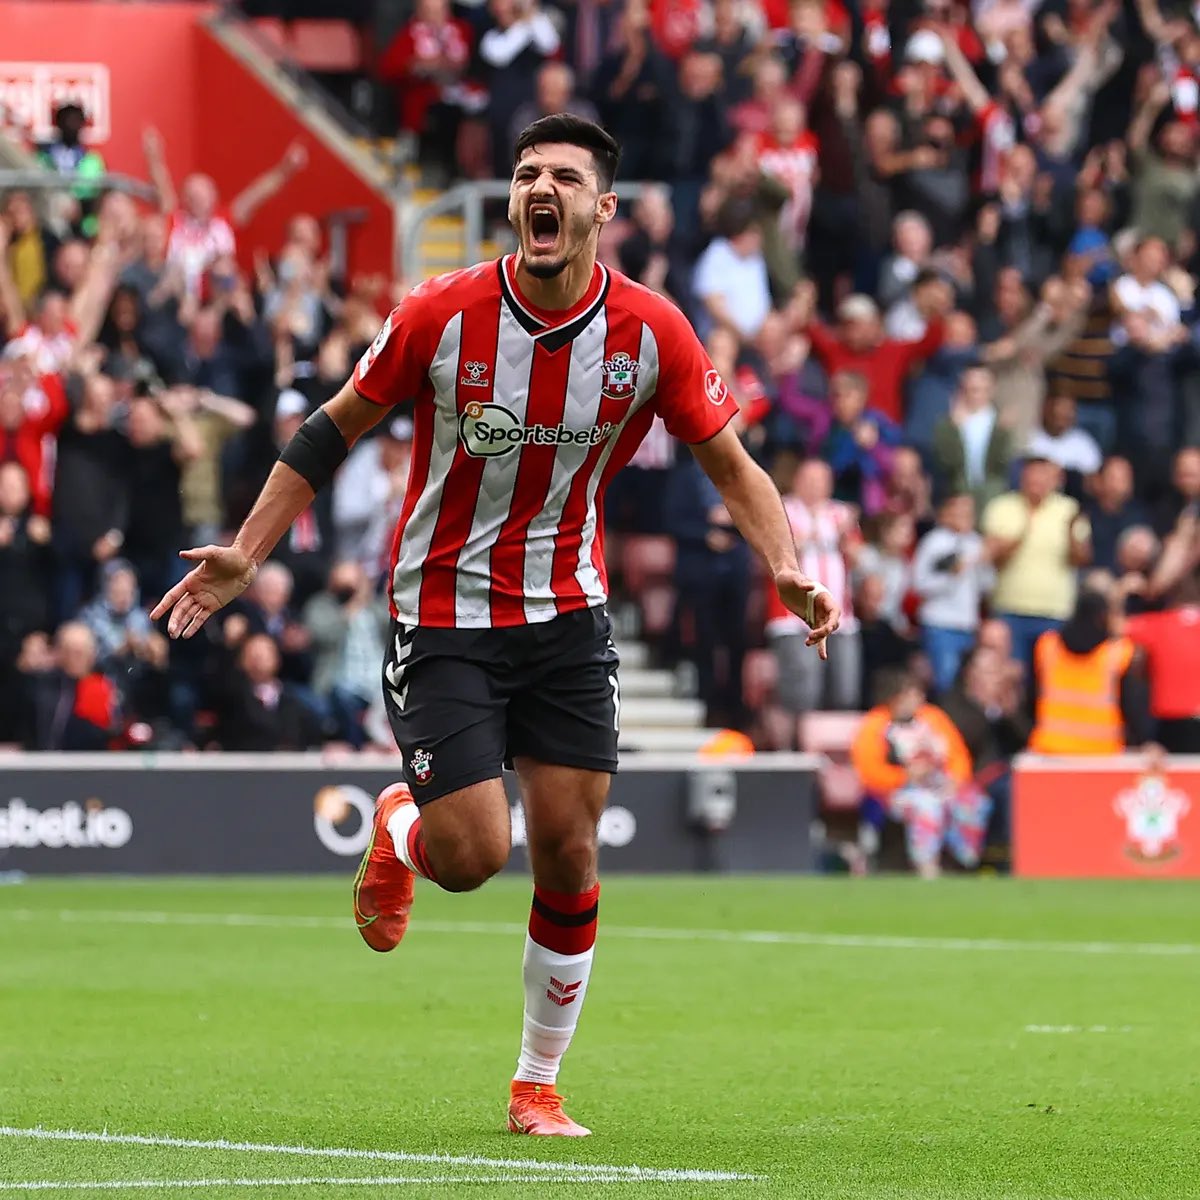 #SaintsFC get on this please 🙏 Armando Broja's Stats at Southampton: 📈 Minutes: 1978 Goals: 6 (xG: 6) Shots: 45 (oT: 21) Chances Created: 10 Fouls Won: 26 Possessions Won in Final Third: 30 Would you take him back? Also #CFC fans, how much would it cost?